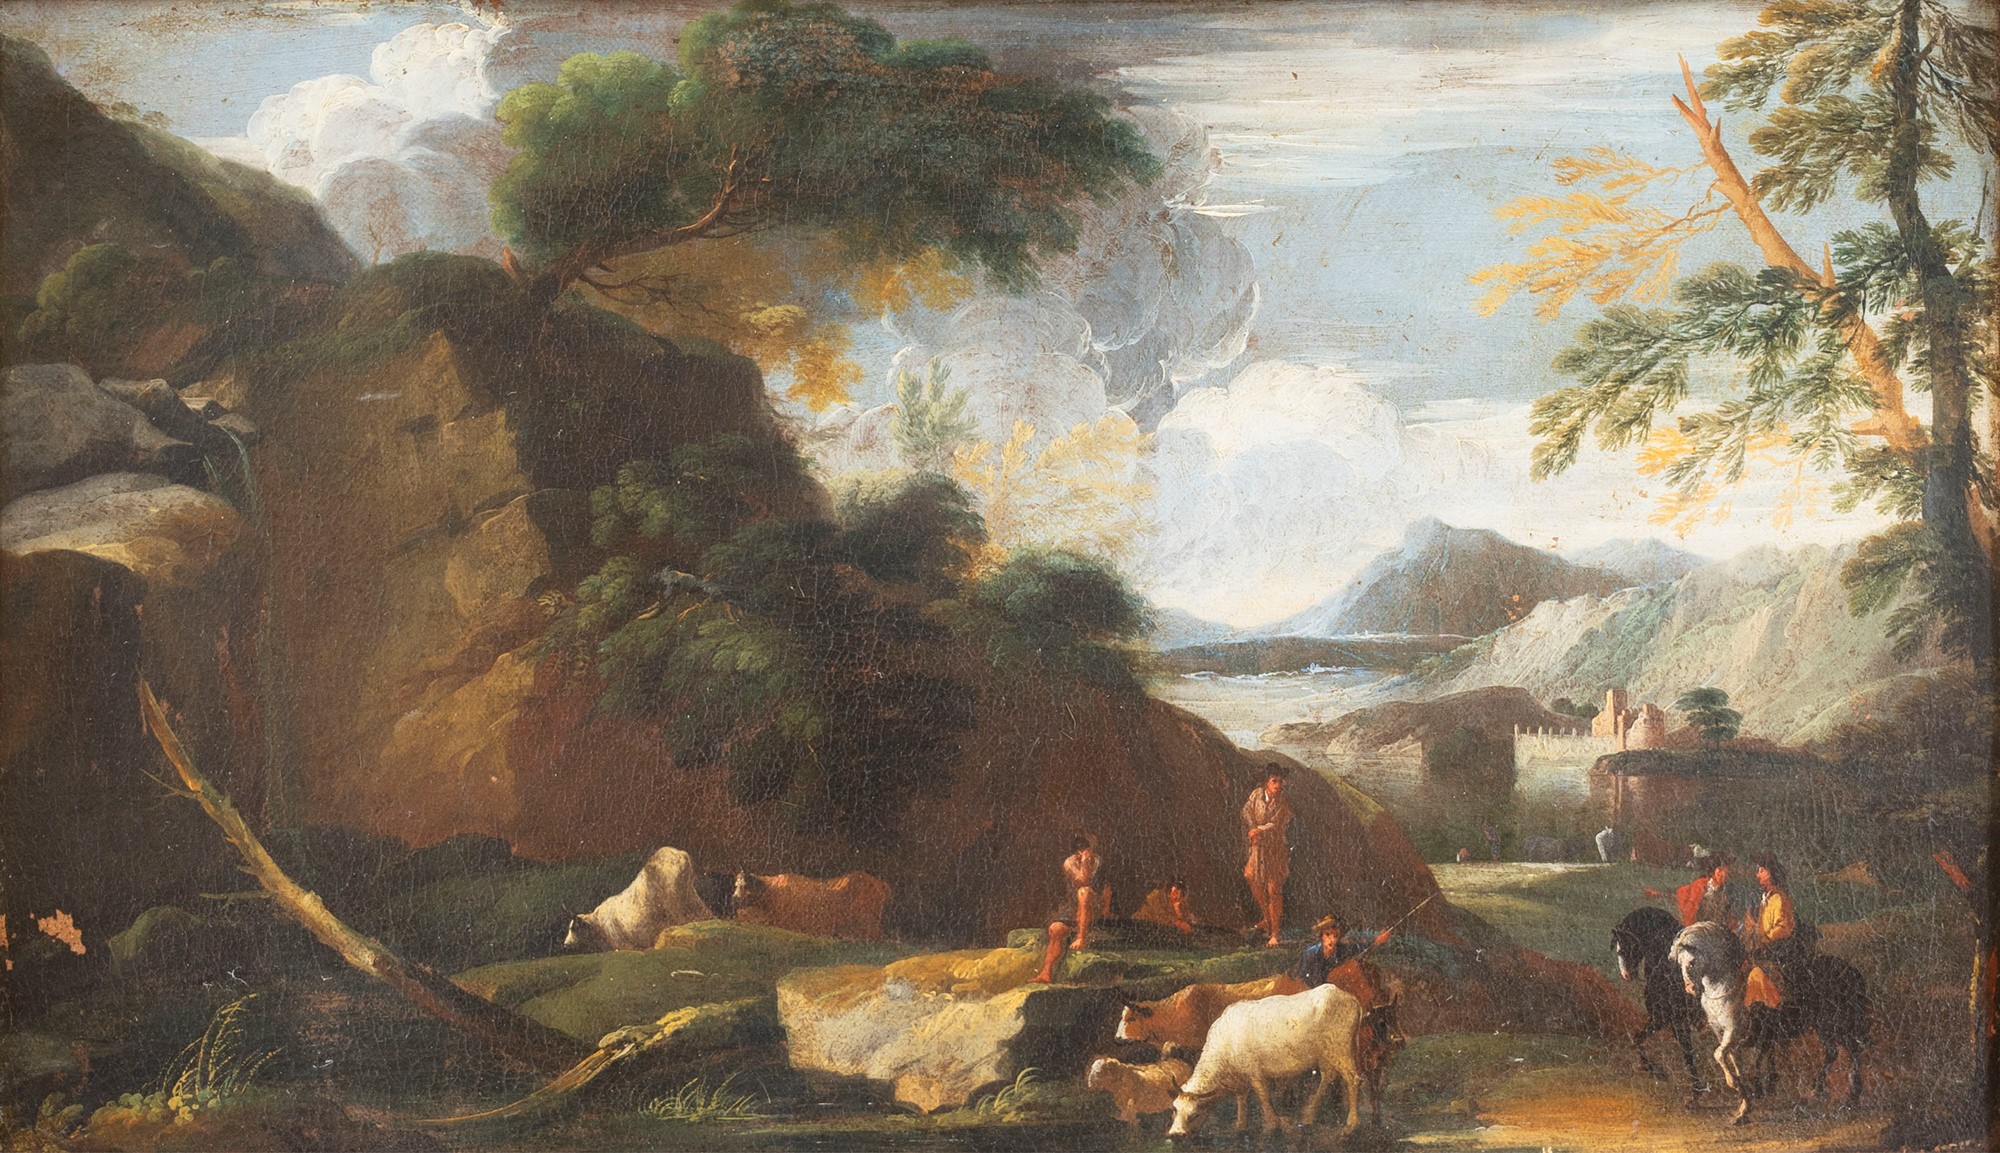 Neapolitan school, XVII century - Two river landscapes with rocky mountains - Image 2 of 7